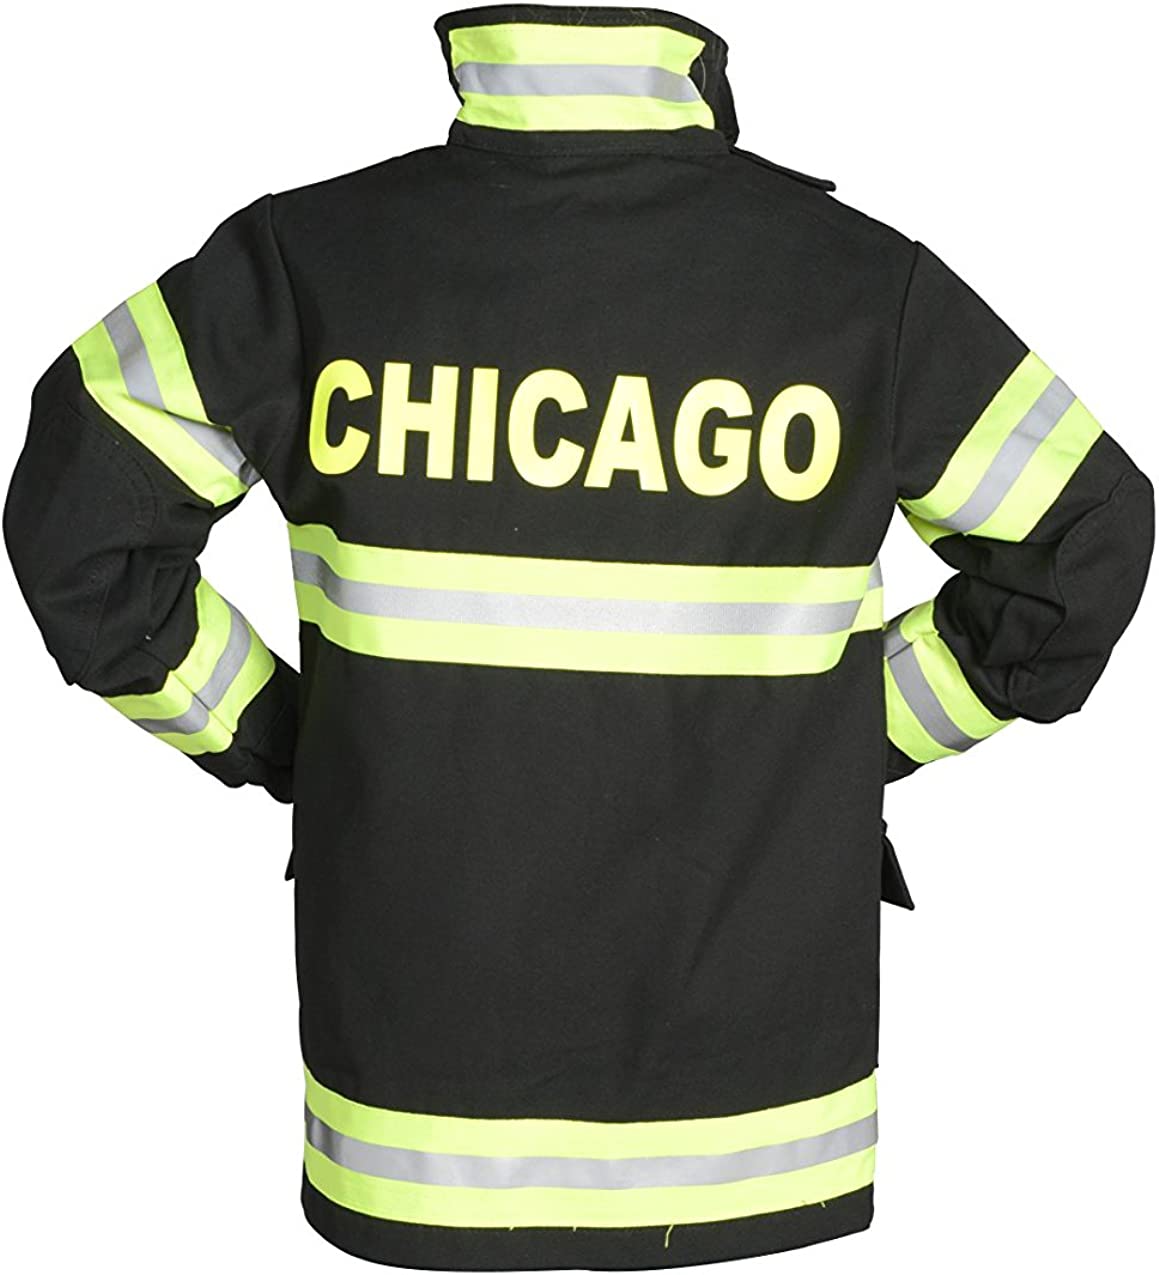 Aeromax Adult Fire Fighter Chicago Suit, Small, Black